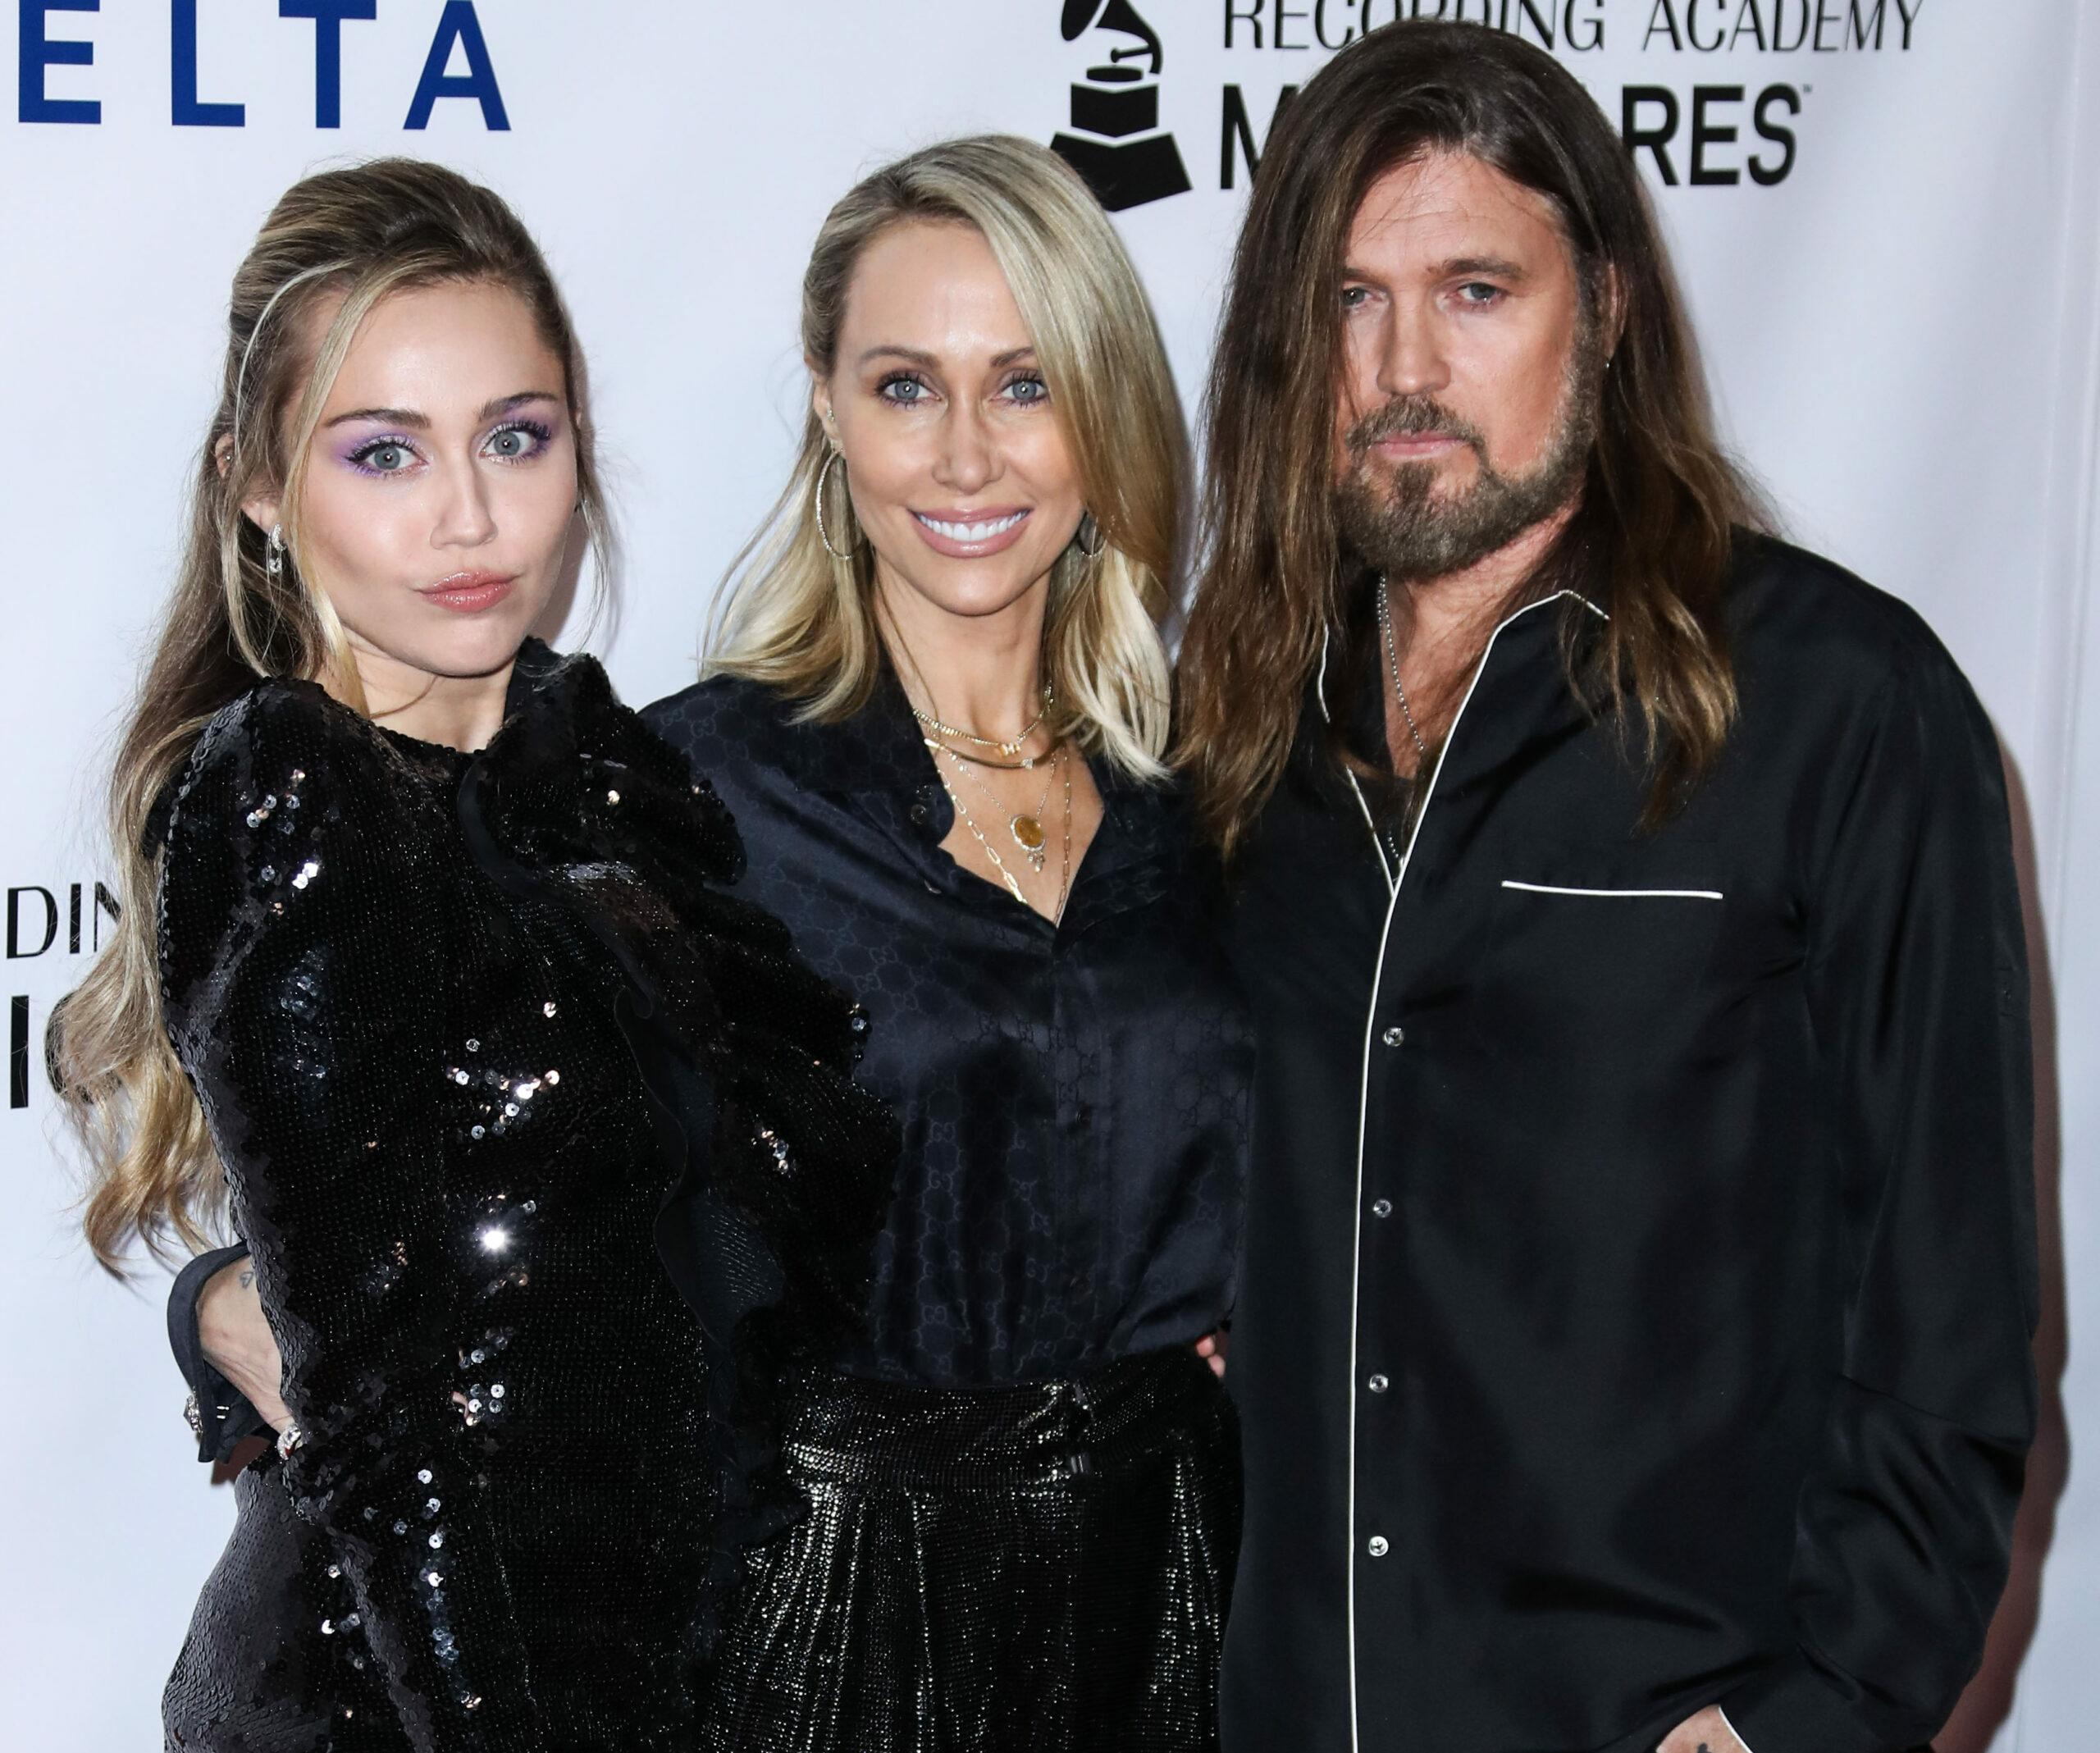 LOS ANGELES, CA, USA - FEBRUARY 08: 2019 MusiCares Person Of The Year Honoring Dolly Parton held at the Los Angeles Convention Center on February 8, 2019 in Los Angeles, California, United States. 08 Feb 2019 Pictured: Miley Cyrus, Tish Cyrus, Billy Ray Cyrus.